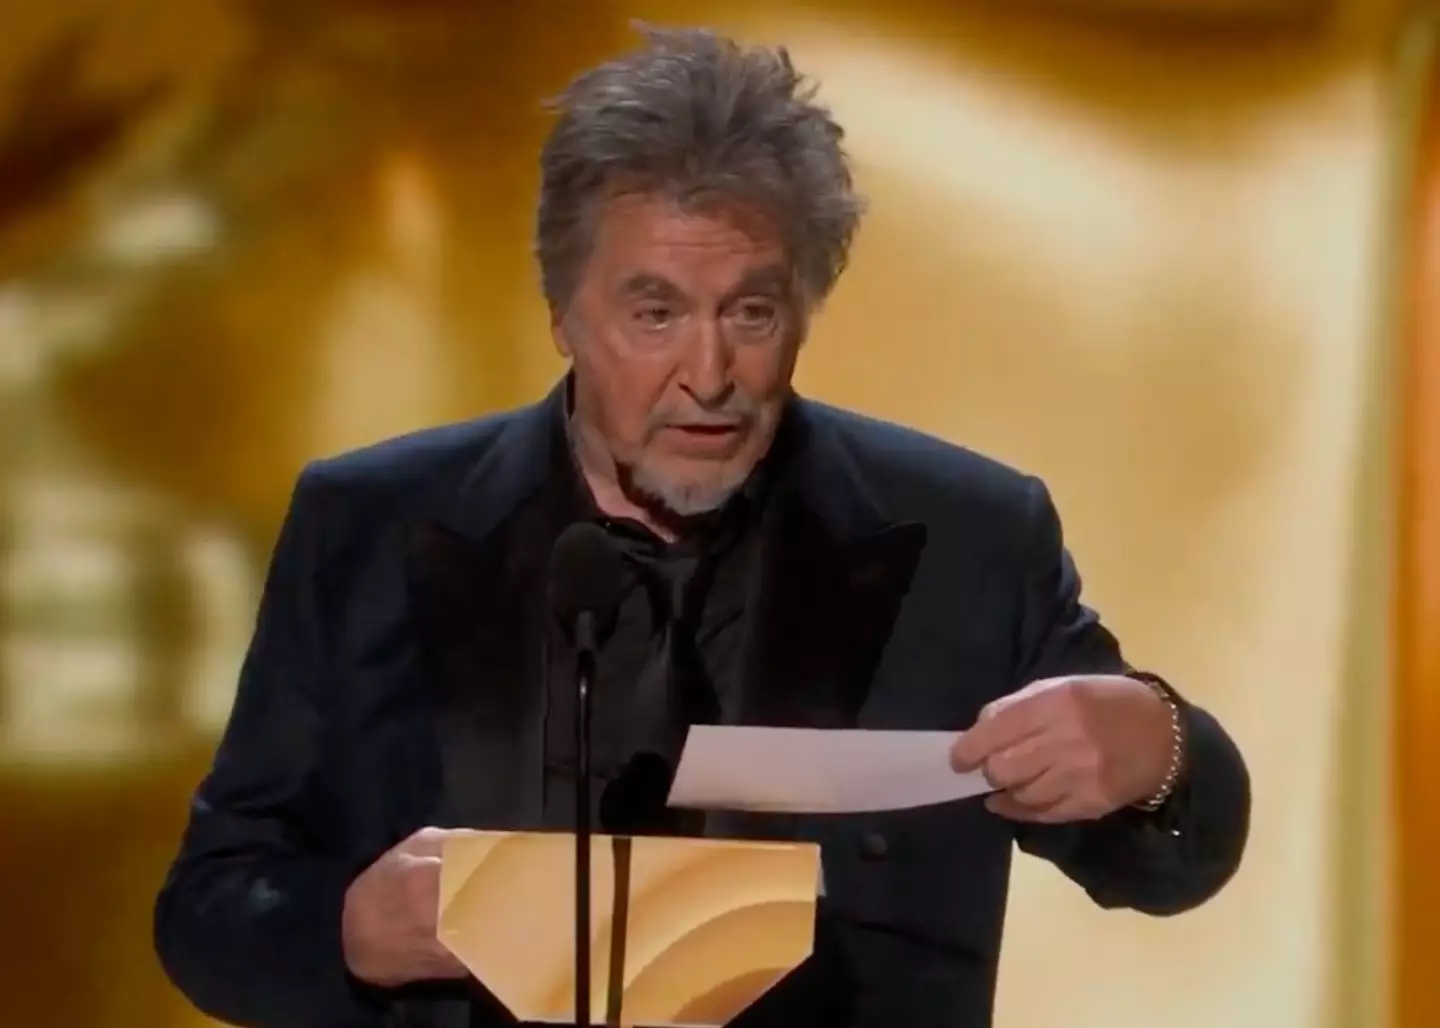 Al Pacino has now apologized to anyone who may have felt 'slighted'.